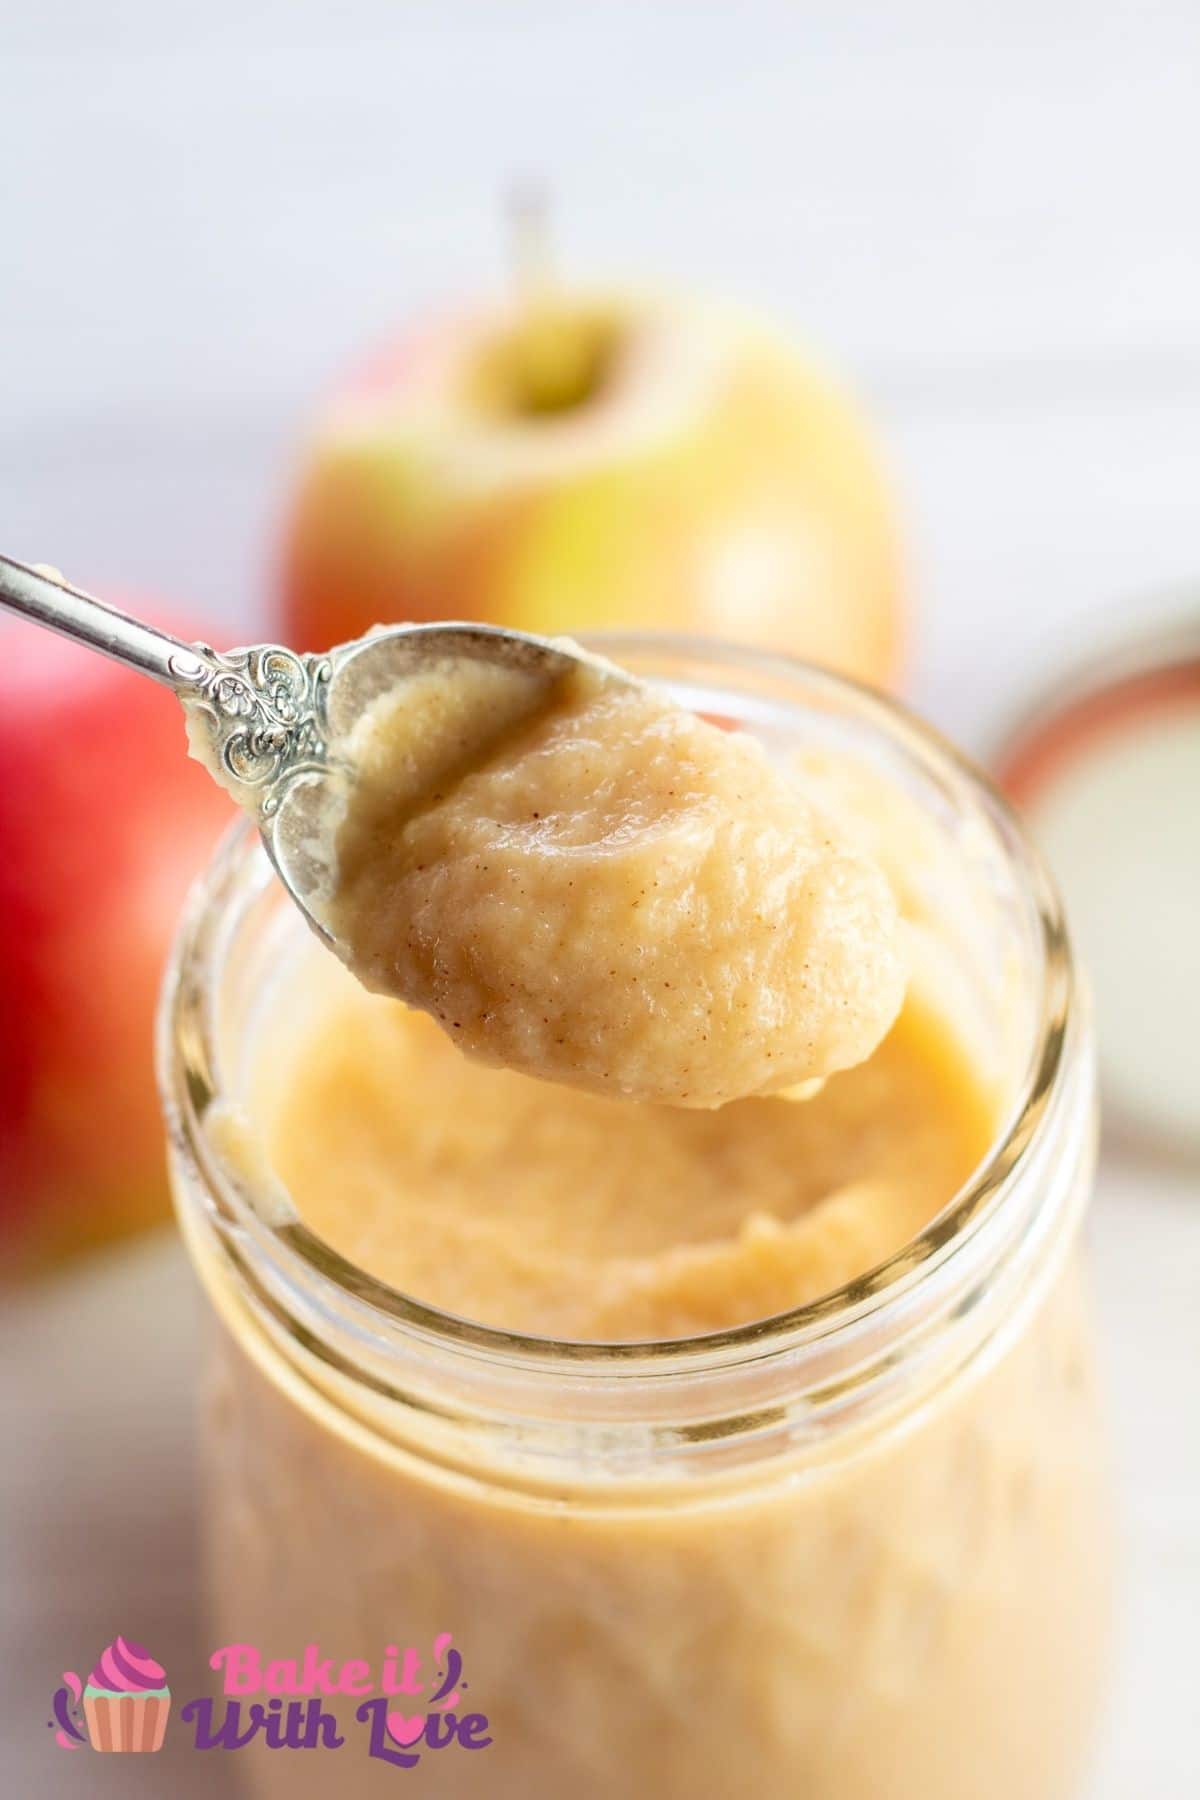 Tall image of the apple curd being spooned from jar.